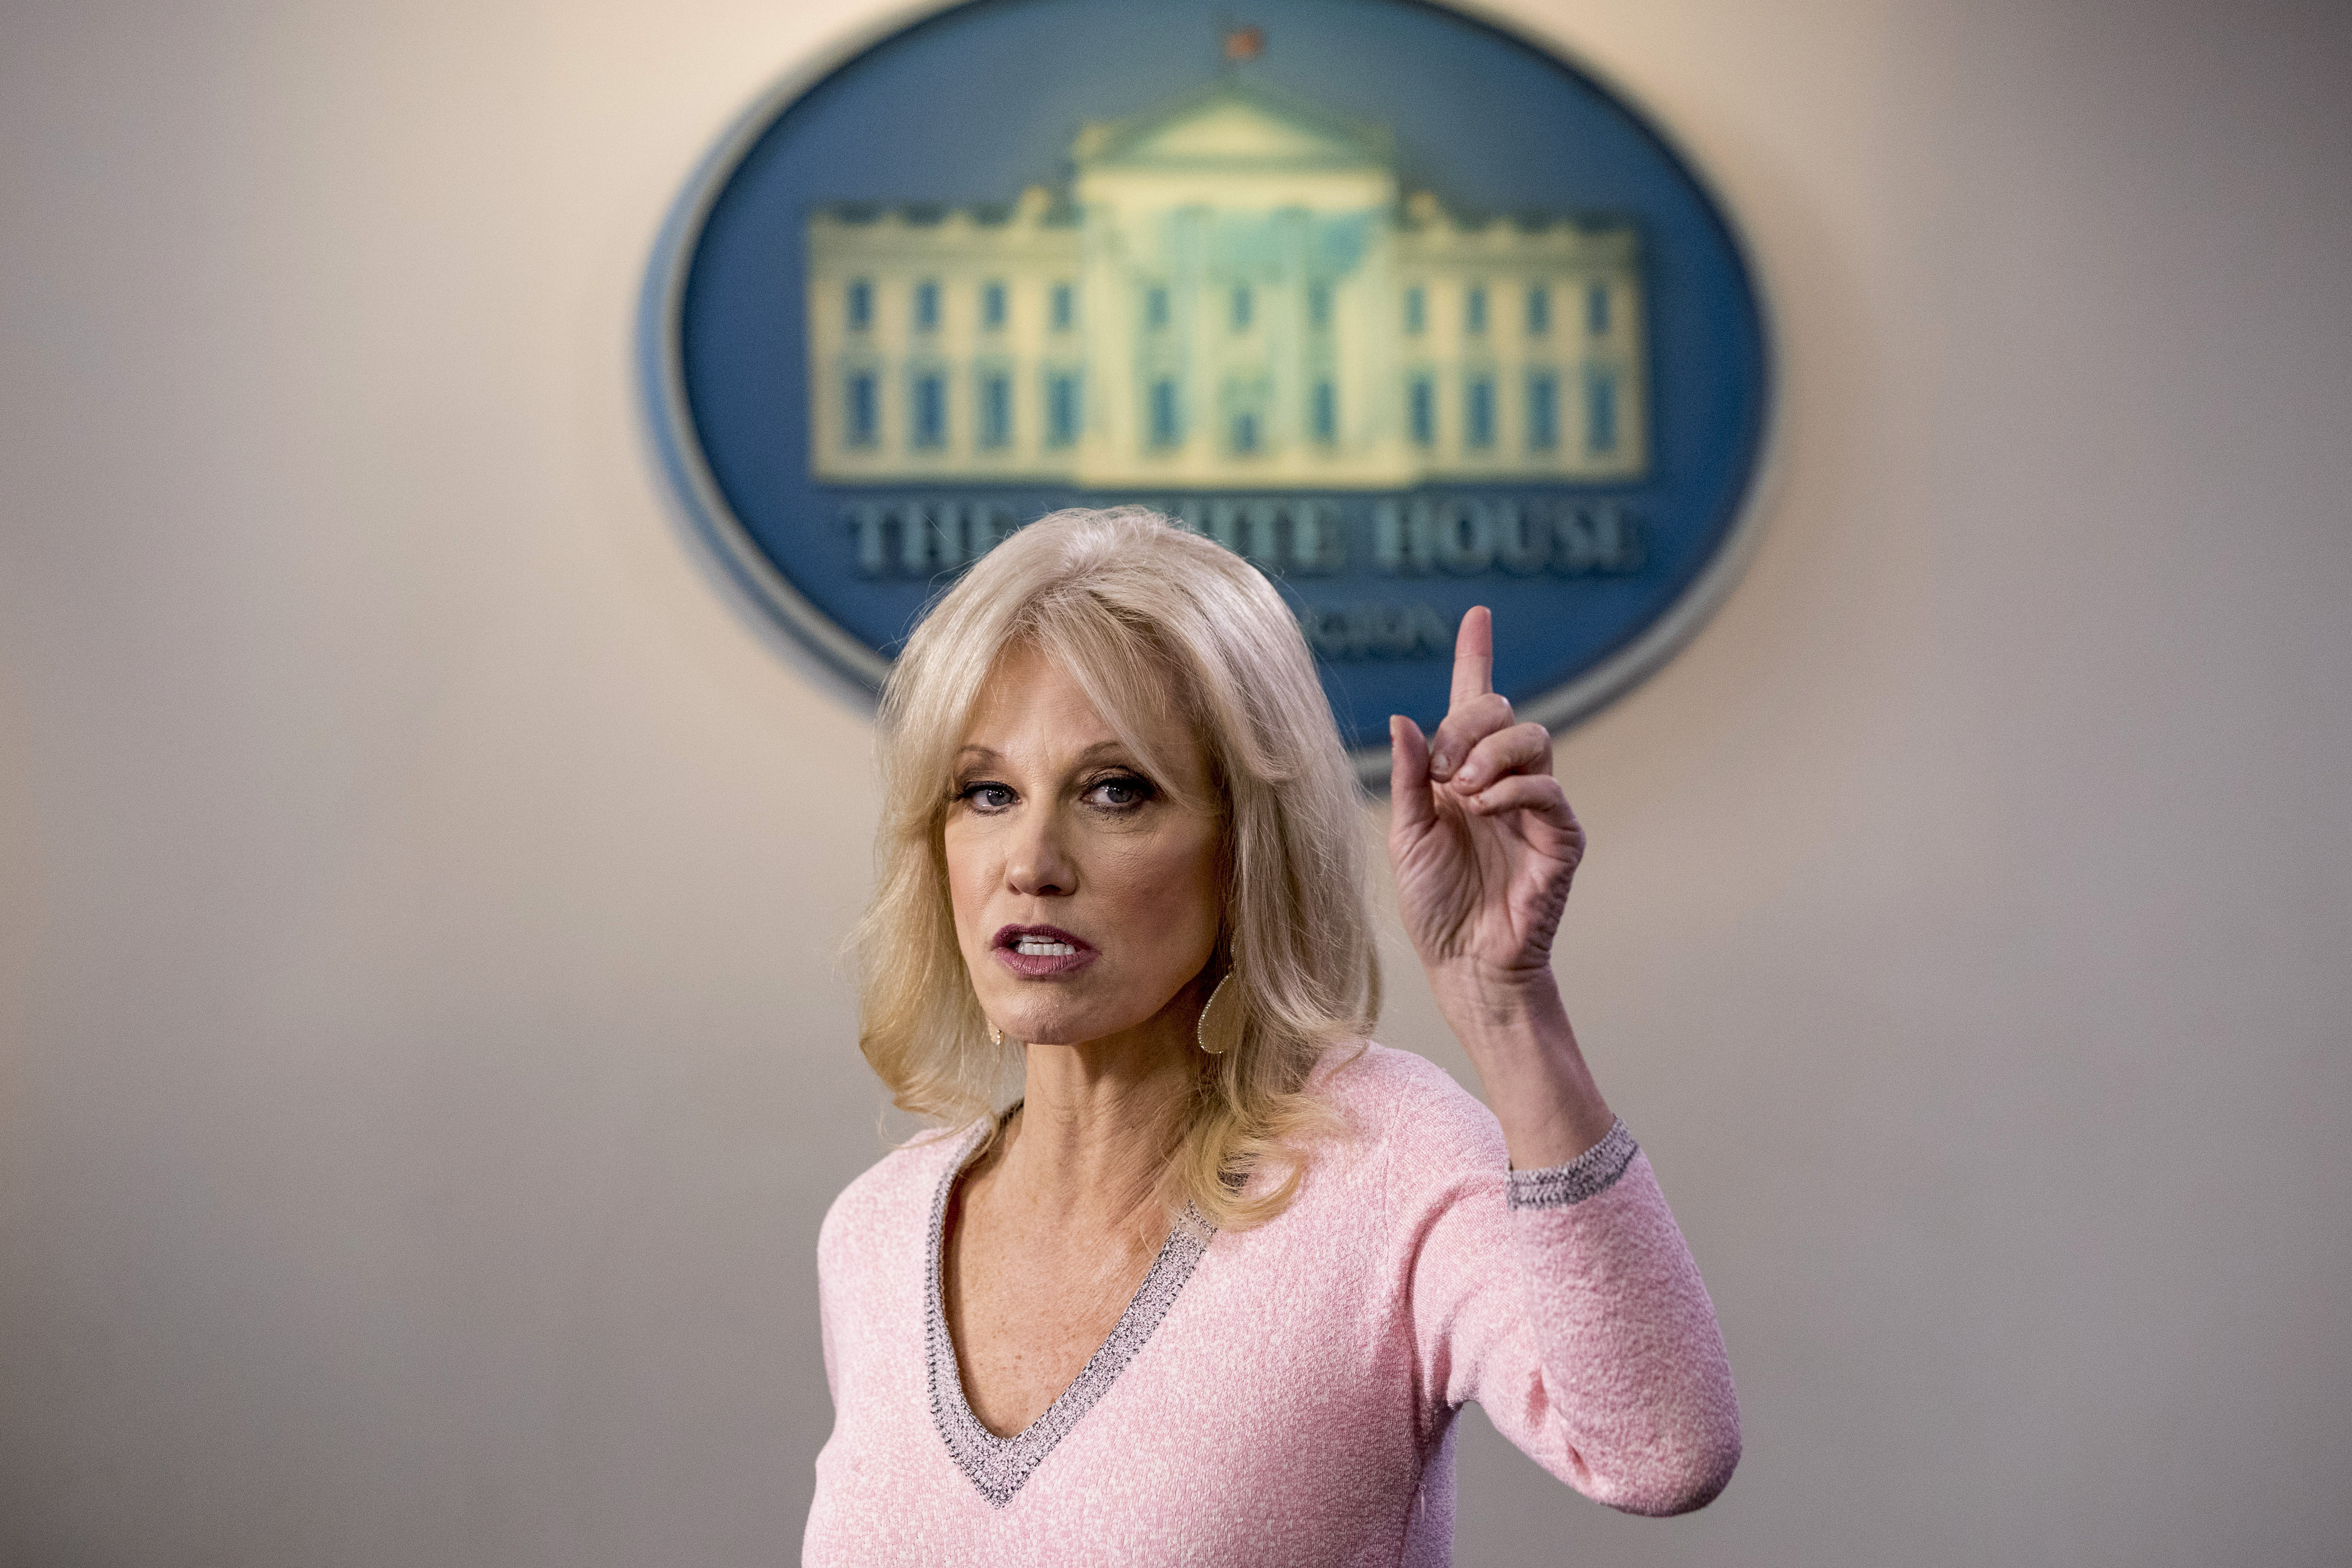 FILE - In this Dec. 5, 2019, file photo, Kellyanne Conway speaks in the Briefing Room at the White House in Washington. Conway, one of President Donald Trumpu2019s most influential and longest serving advisers, announced Sunday, Aug. 23, 2020, that she would be leaving the White House at the end of the month.nConway, who was Trumpu2019s campaign manager during the stretch run of the 2016 race, was the first woman to successfully steer a White House bid before becoming a senior counselor to the president. She informed Trump of her decision in the Oval Office. Photo: AP